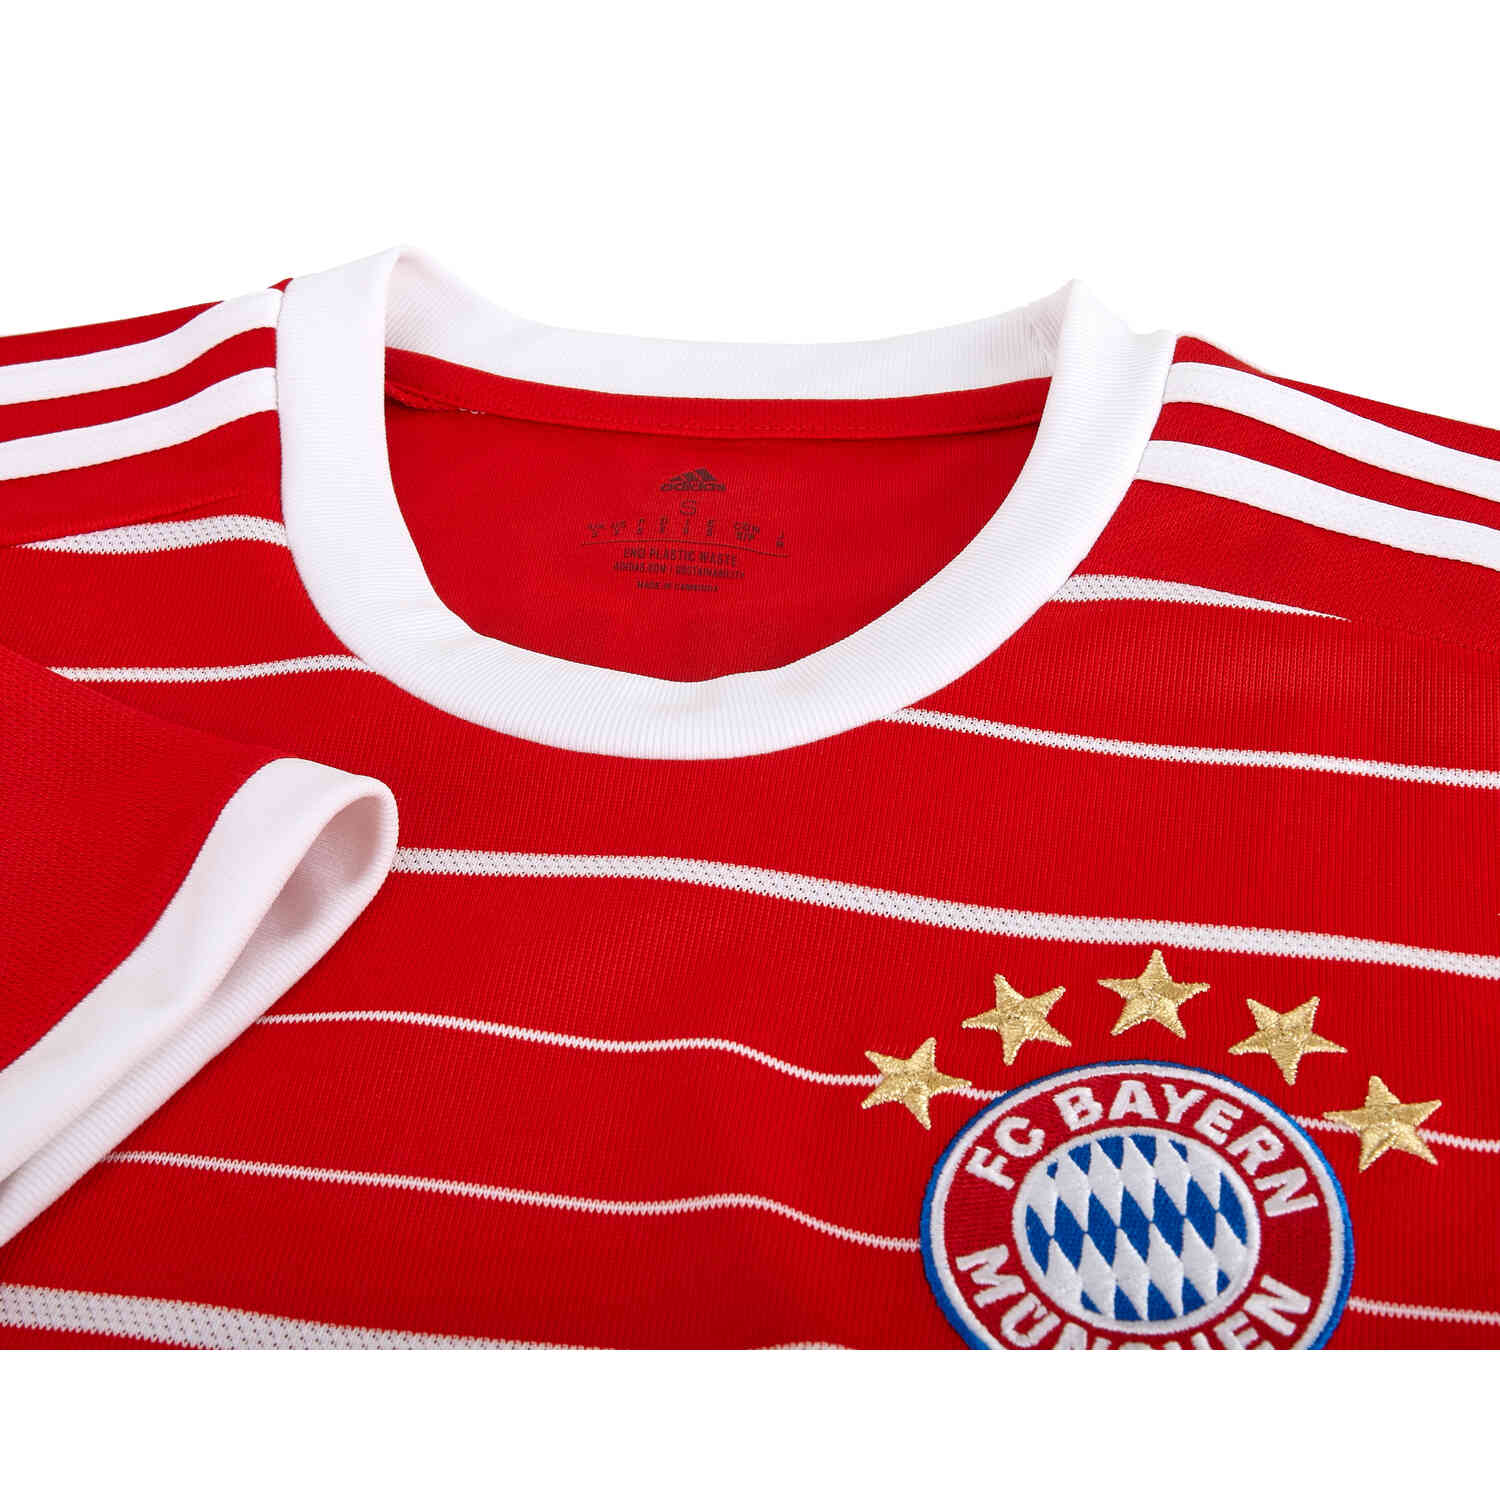 The new FC Bayern home shirt for 2022/23